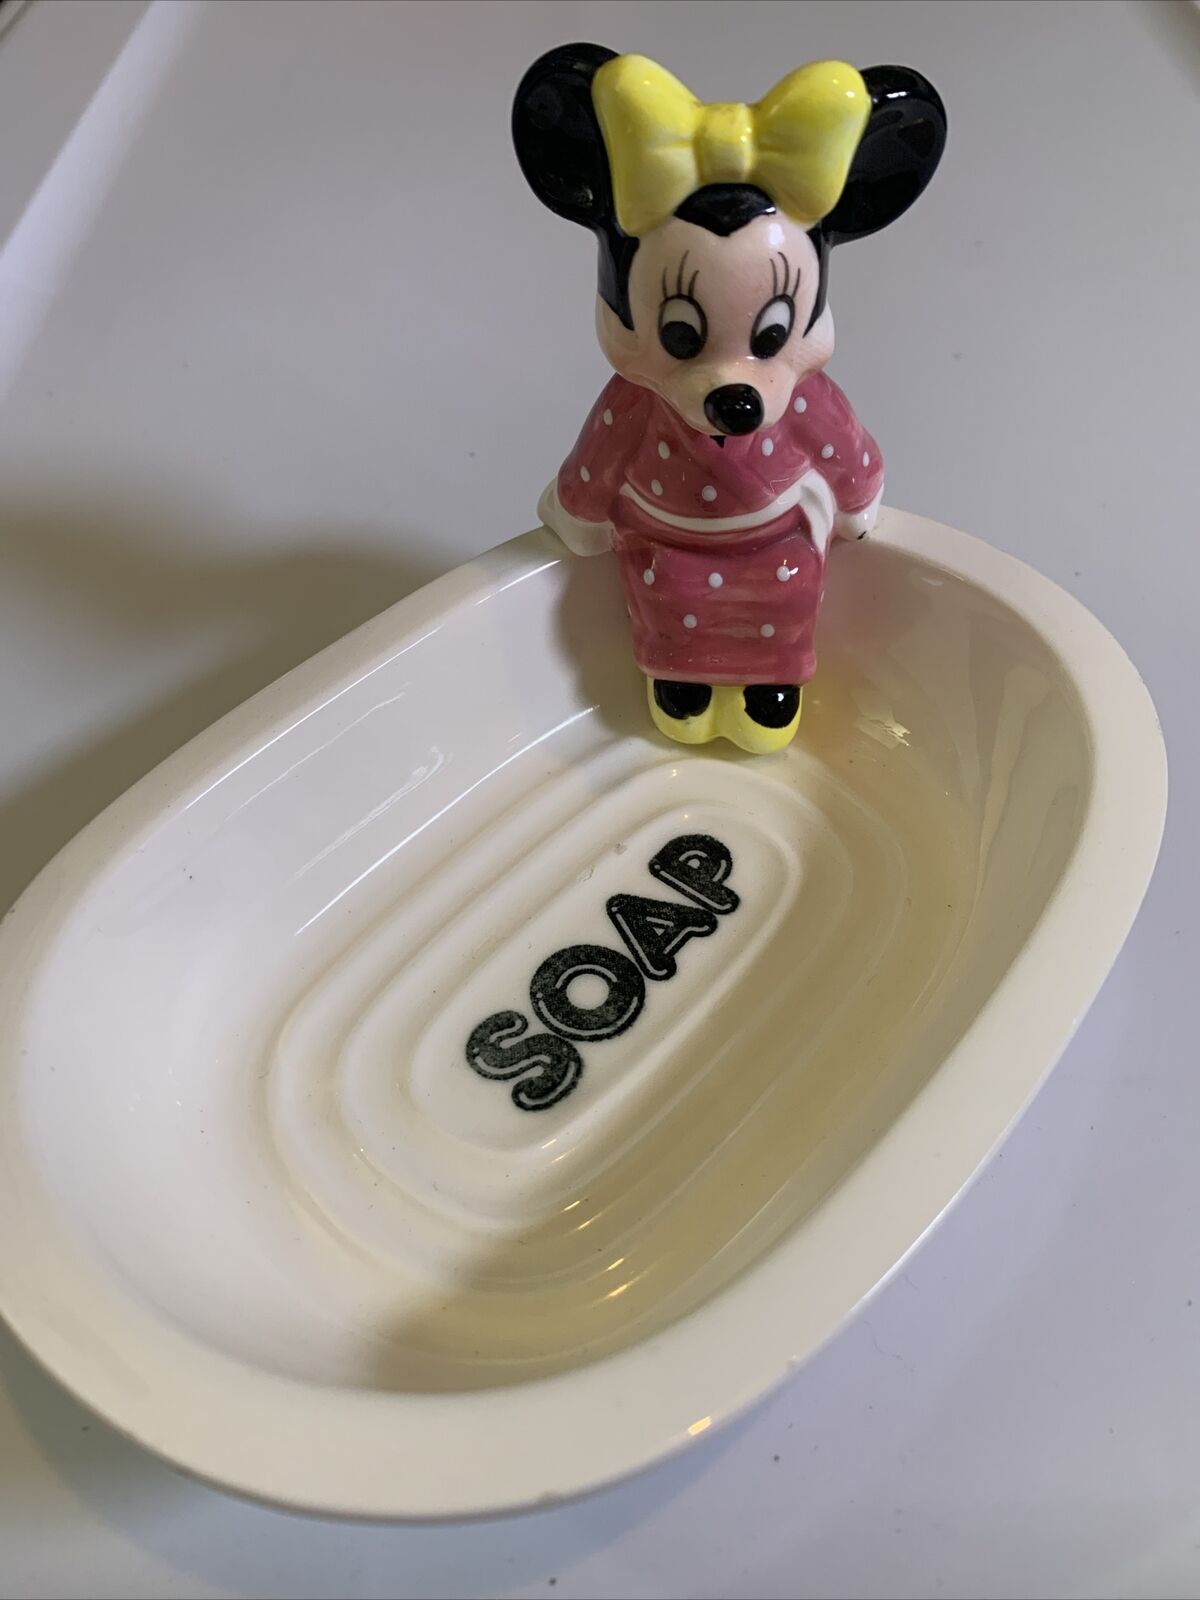 Vintage Disney Minnie Mouse Soap Dish. Great Condition Made in Japan